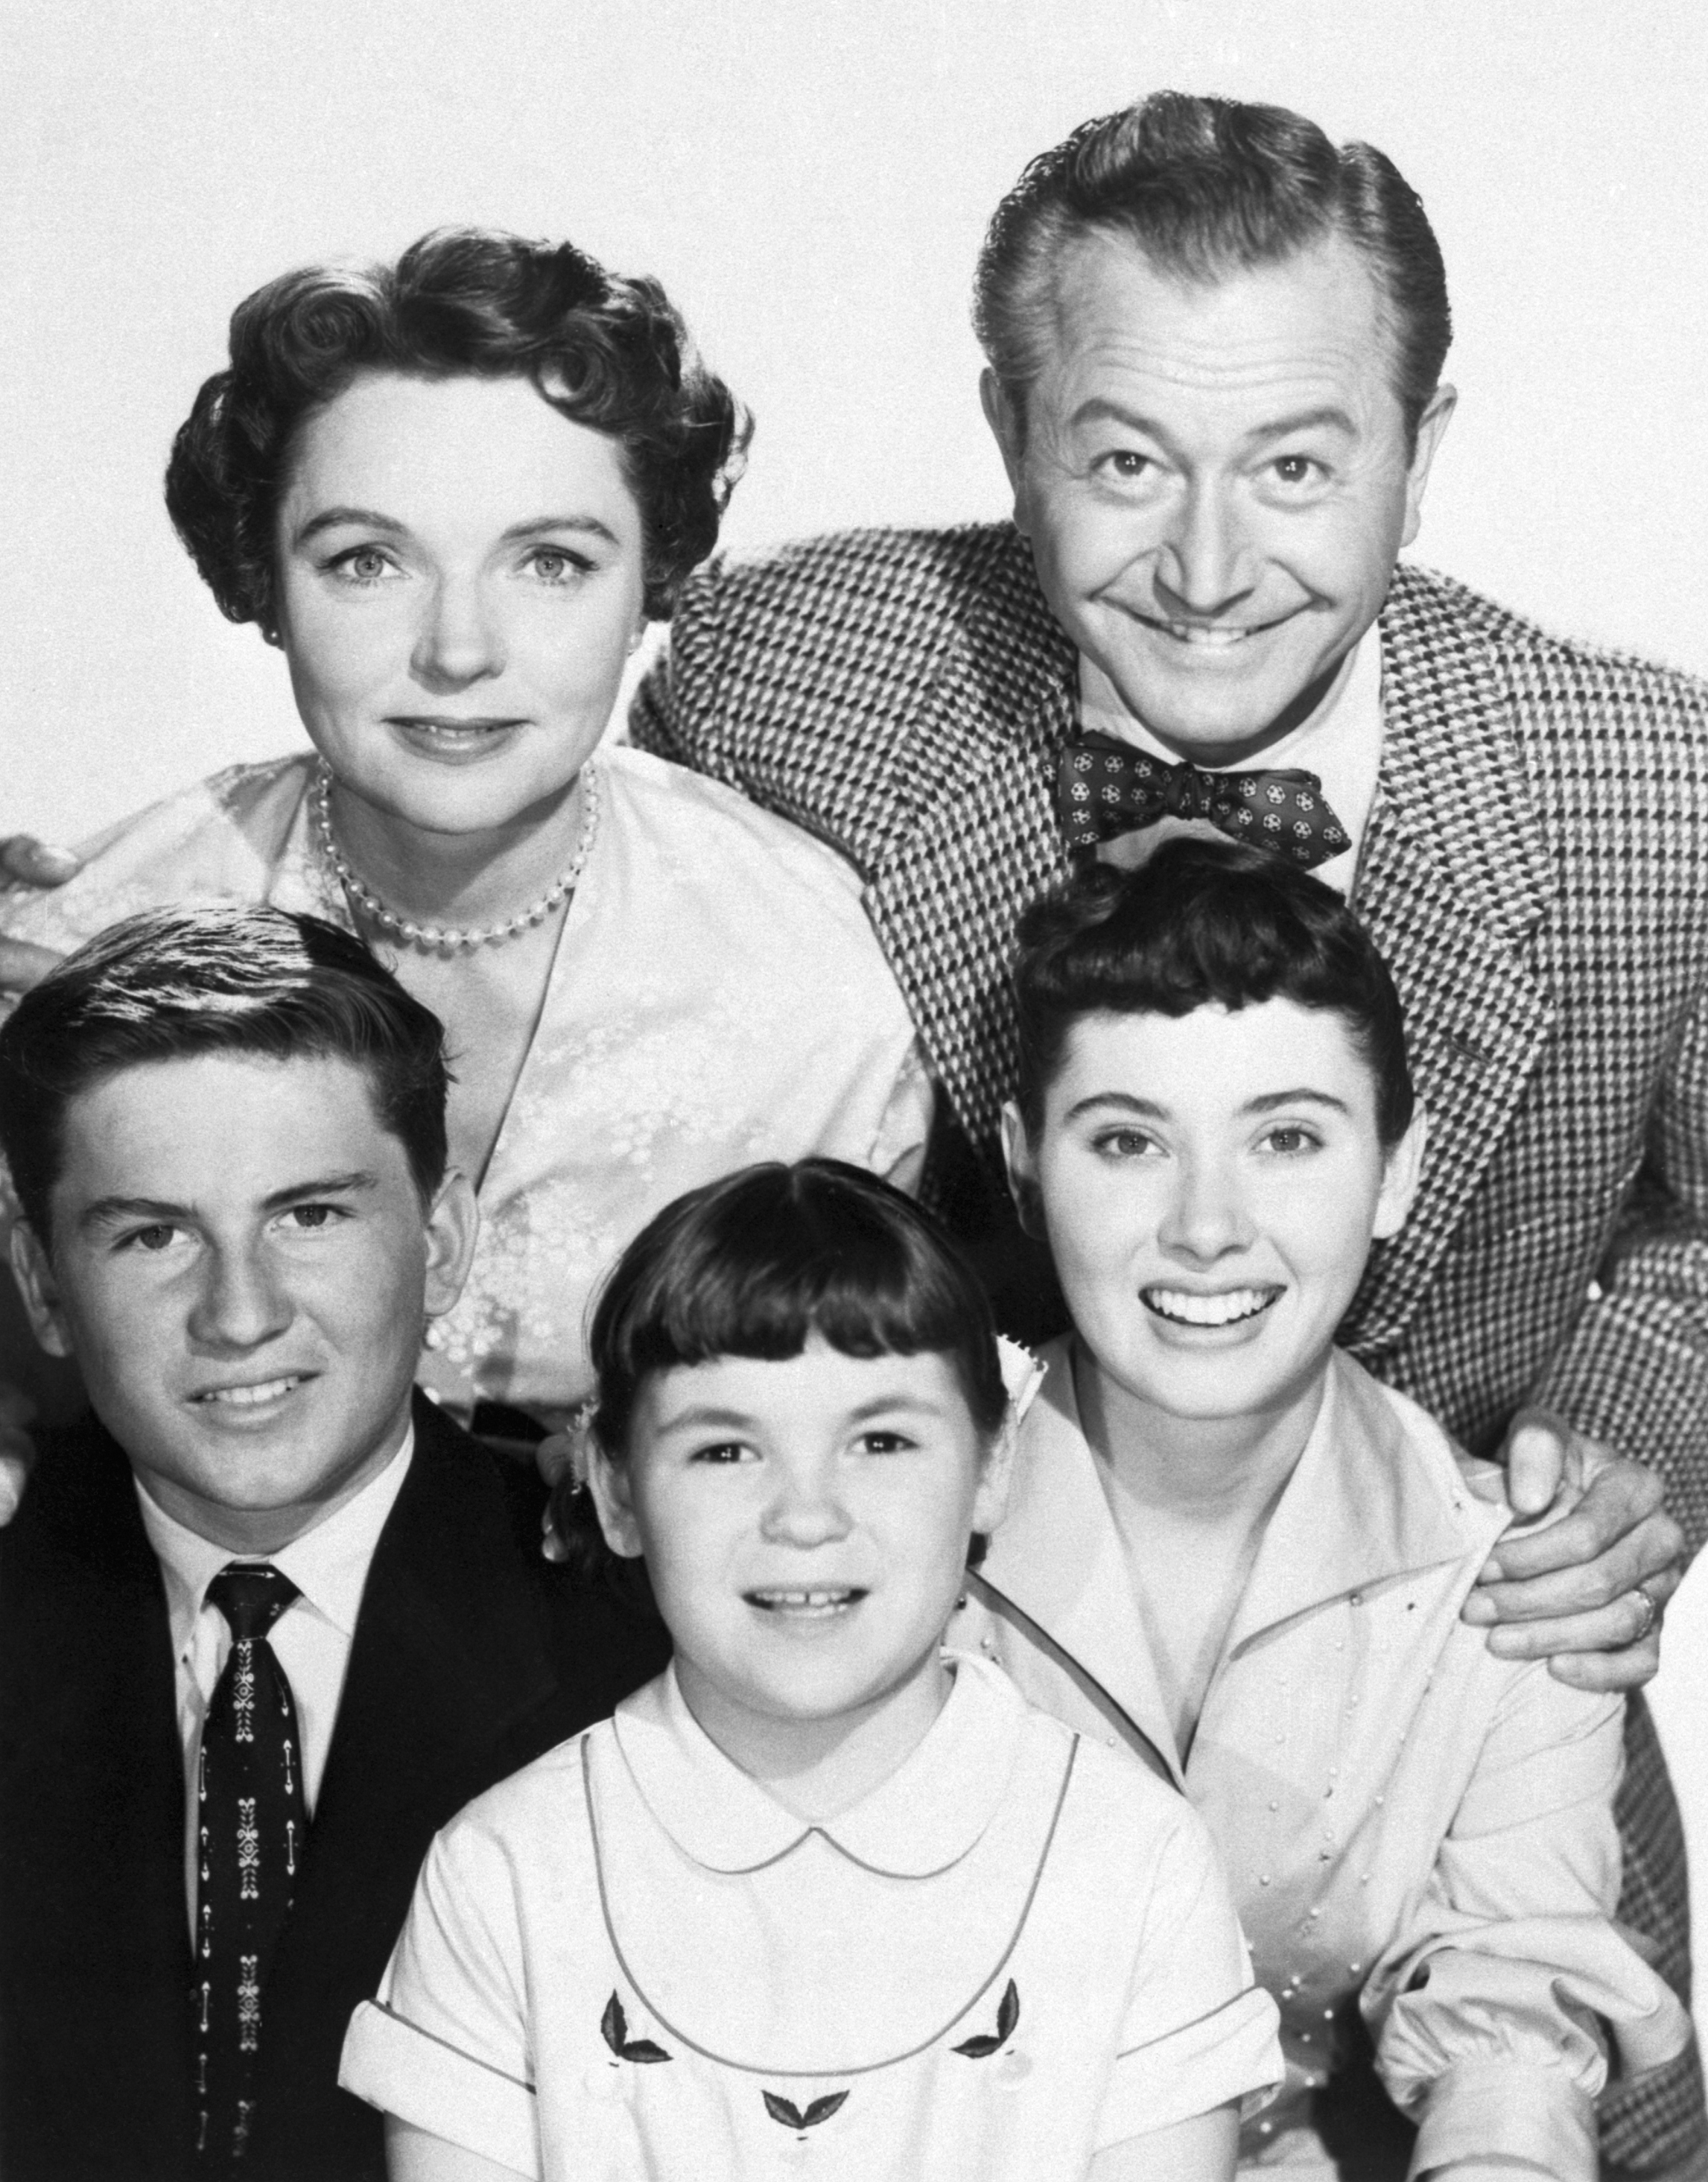 Robert Young and Jane Wyatt with Billy Gray, Lauren Chapin, and Elinor Donahue from the show "Father Knows Best" in 1955 | Source: Getty Images